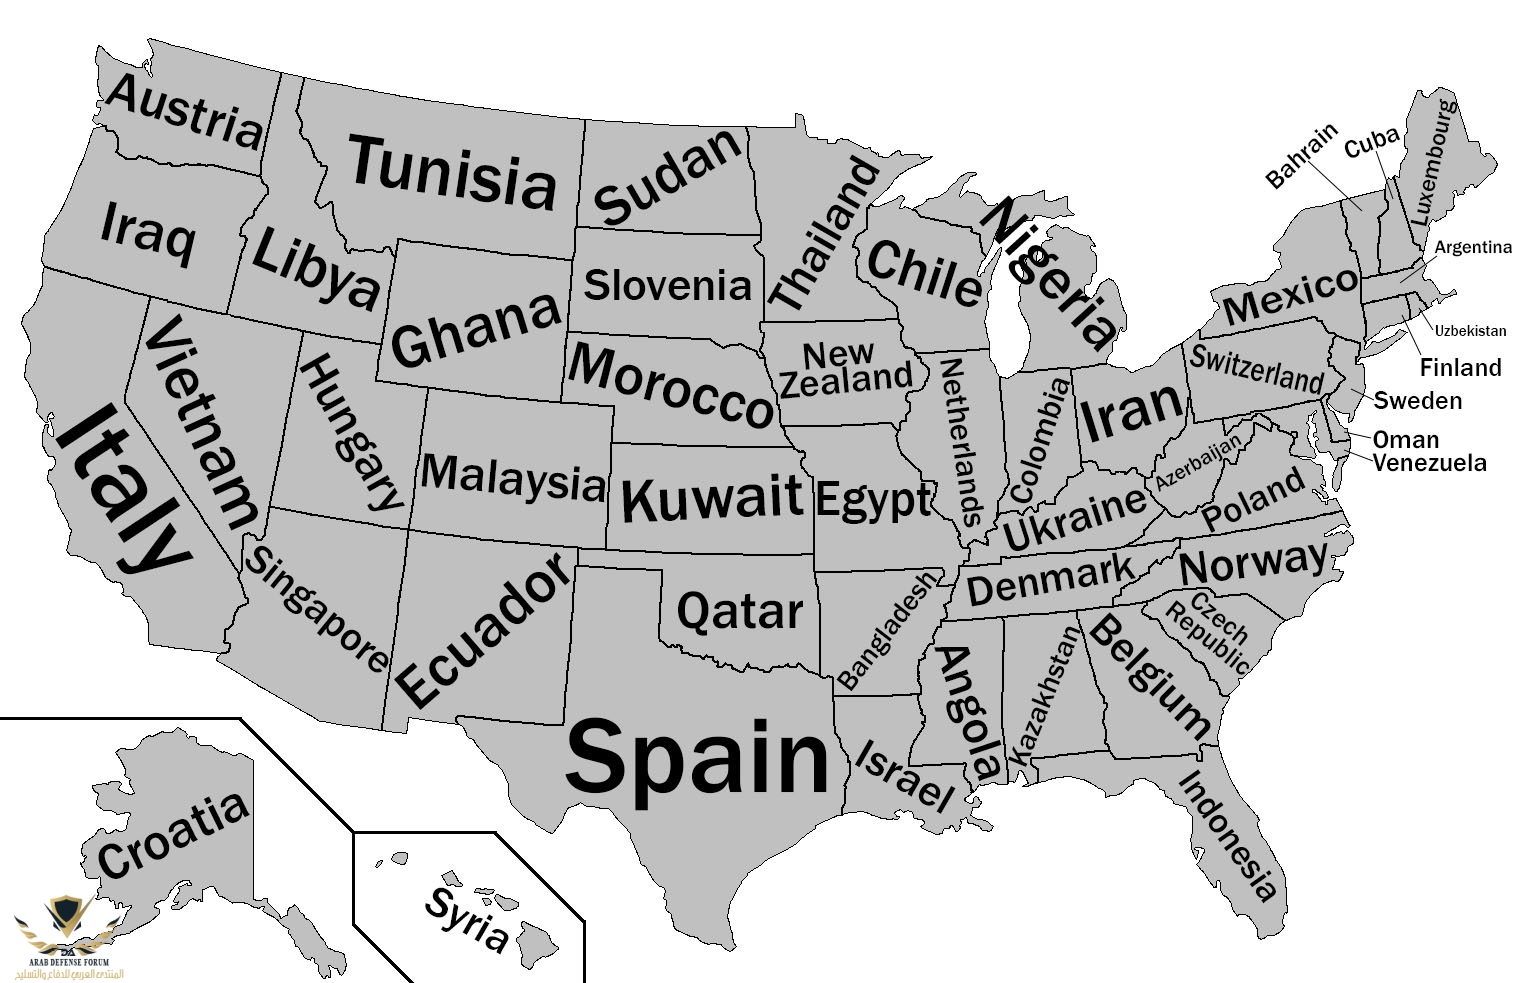 This image compared US states and other countries by GDP approximately in 2012..jpg